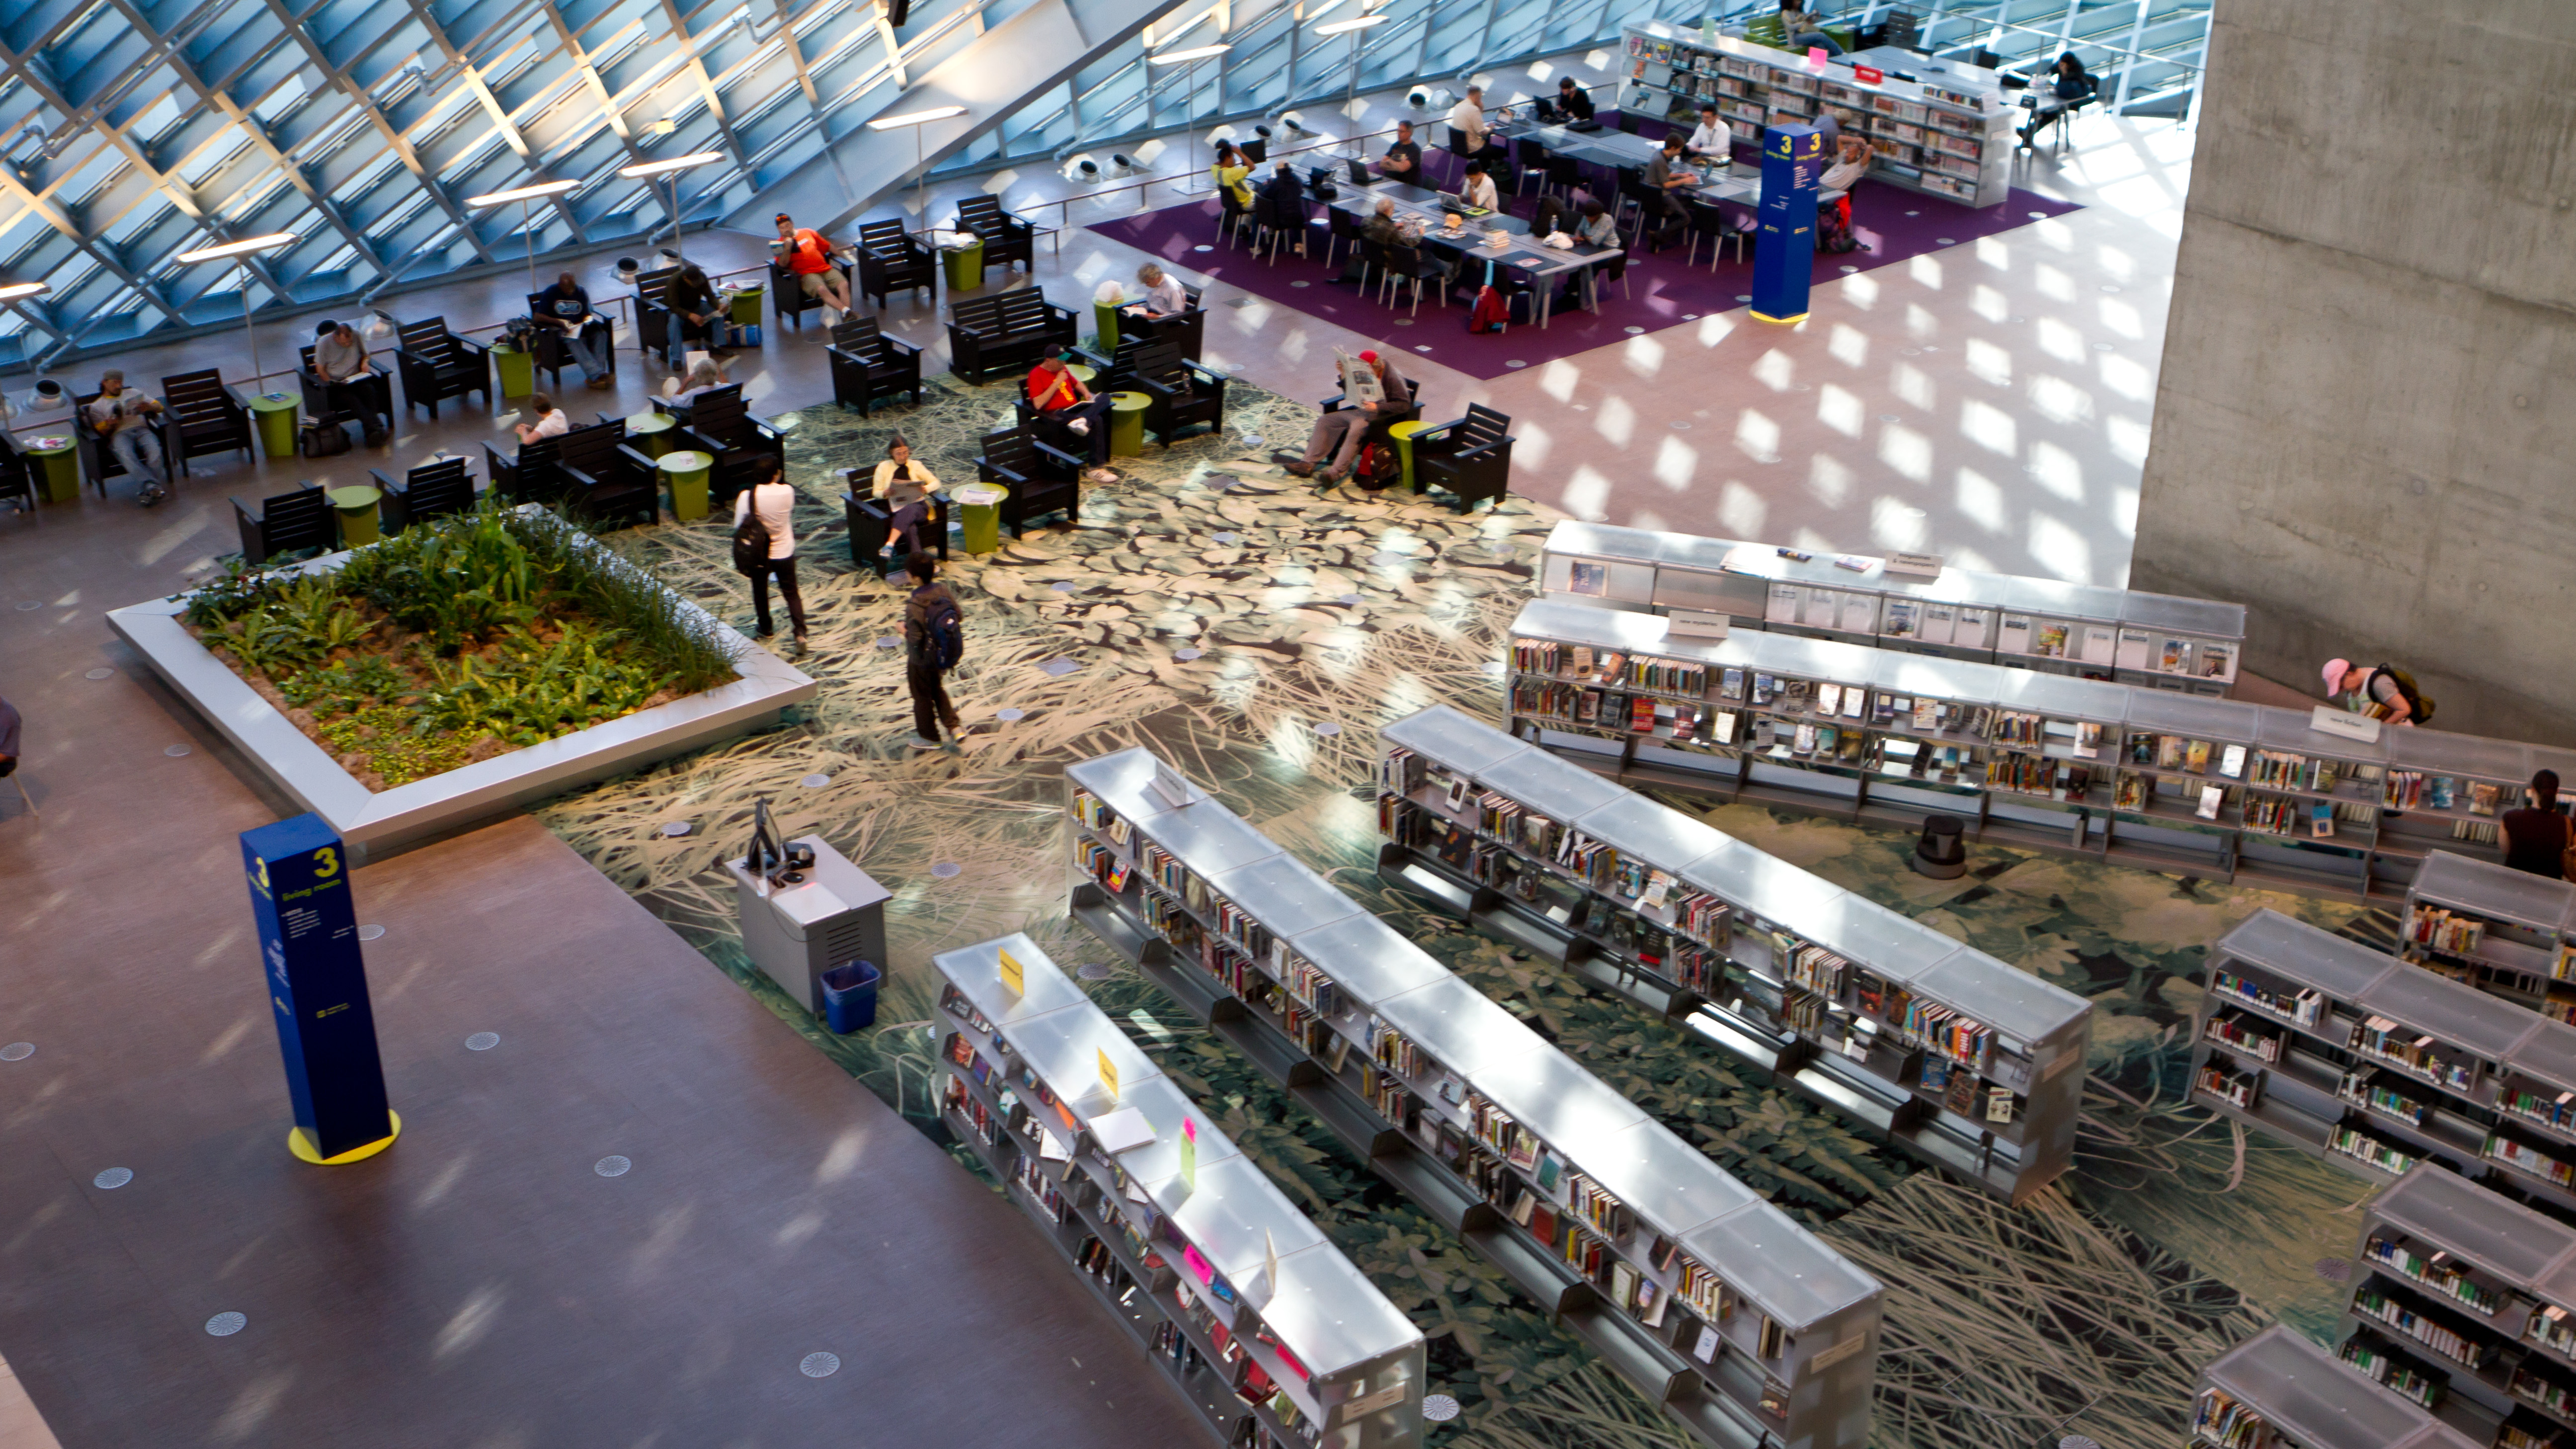 Seattle public library reading room